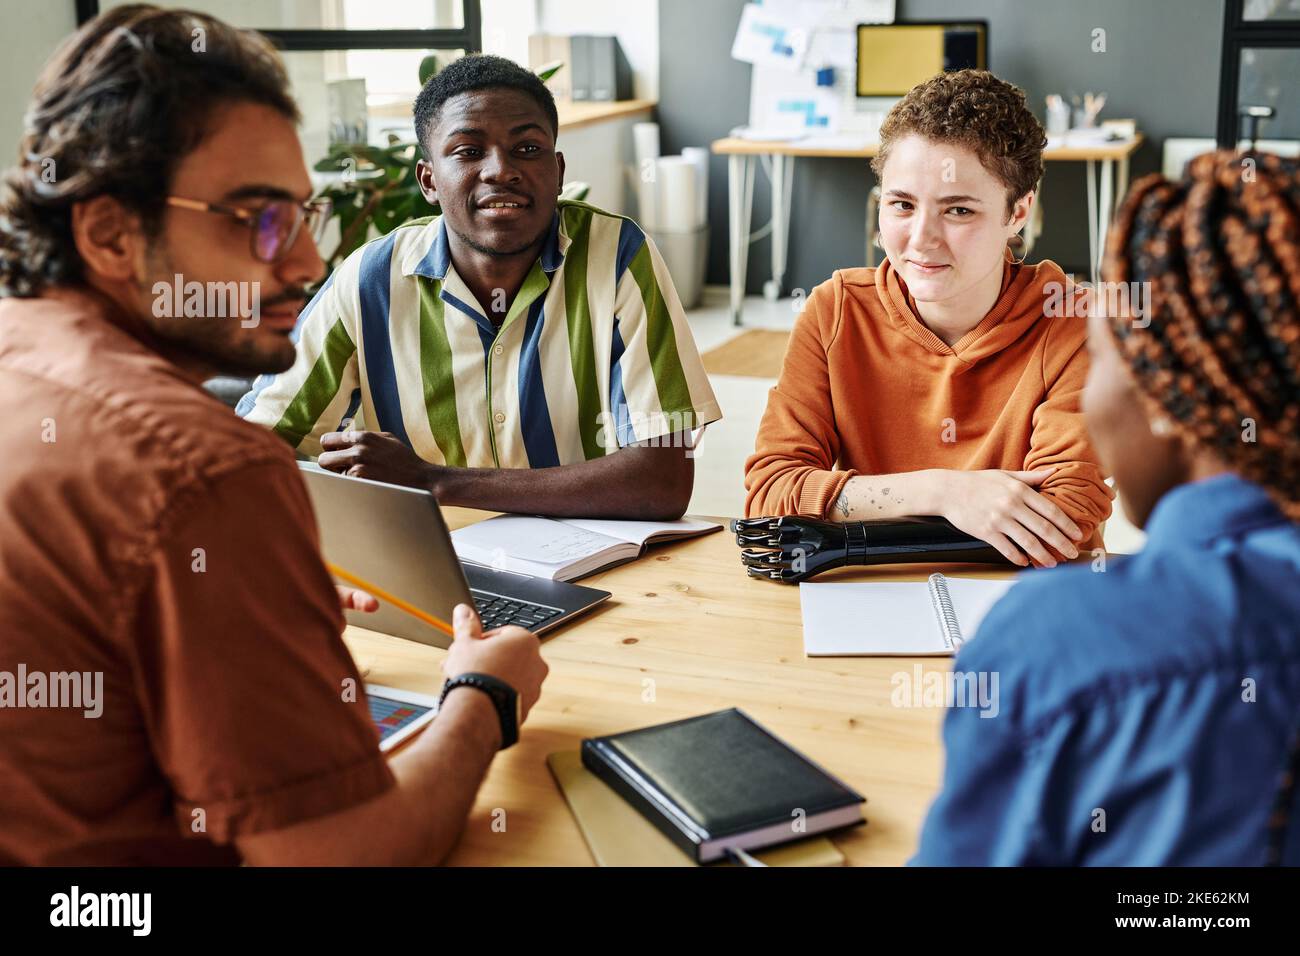 Young creative designer with myoelectric arm and African American man listening to their colleague during discussion of new ideas Stock Photo